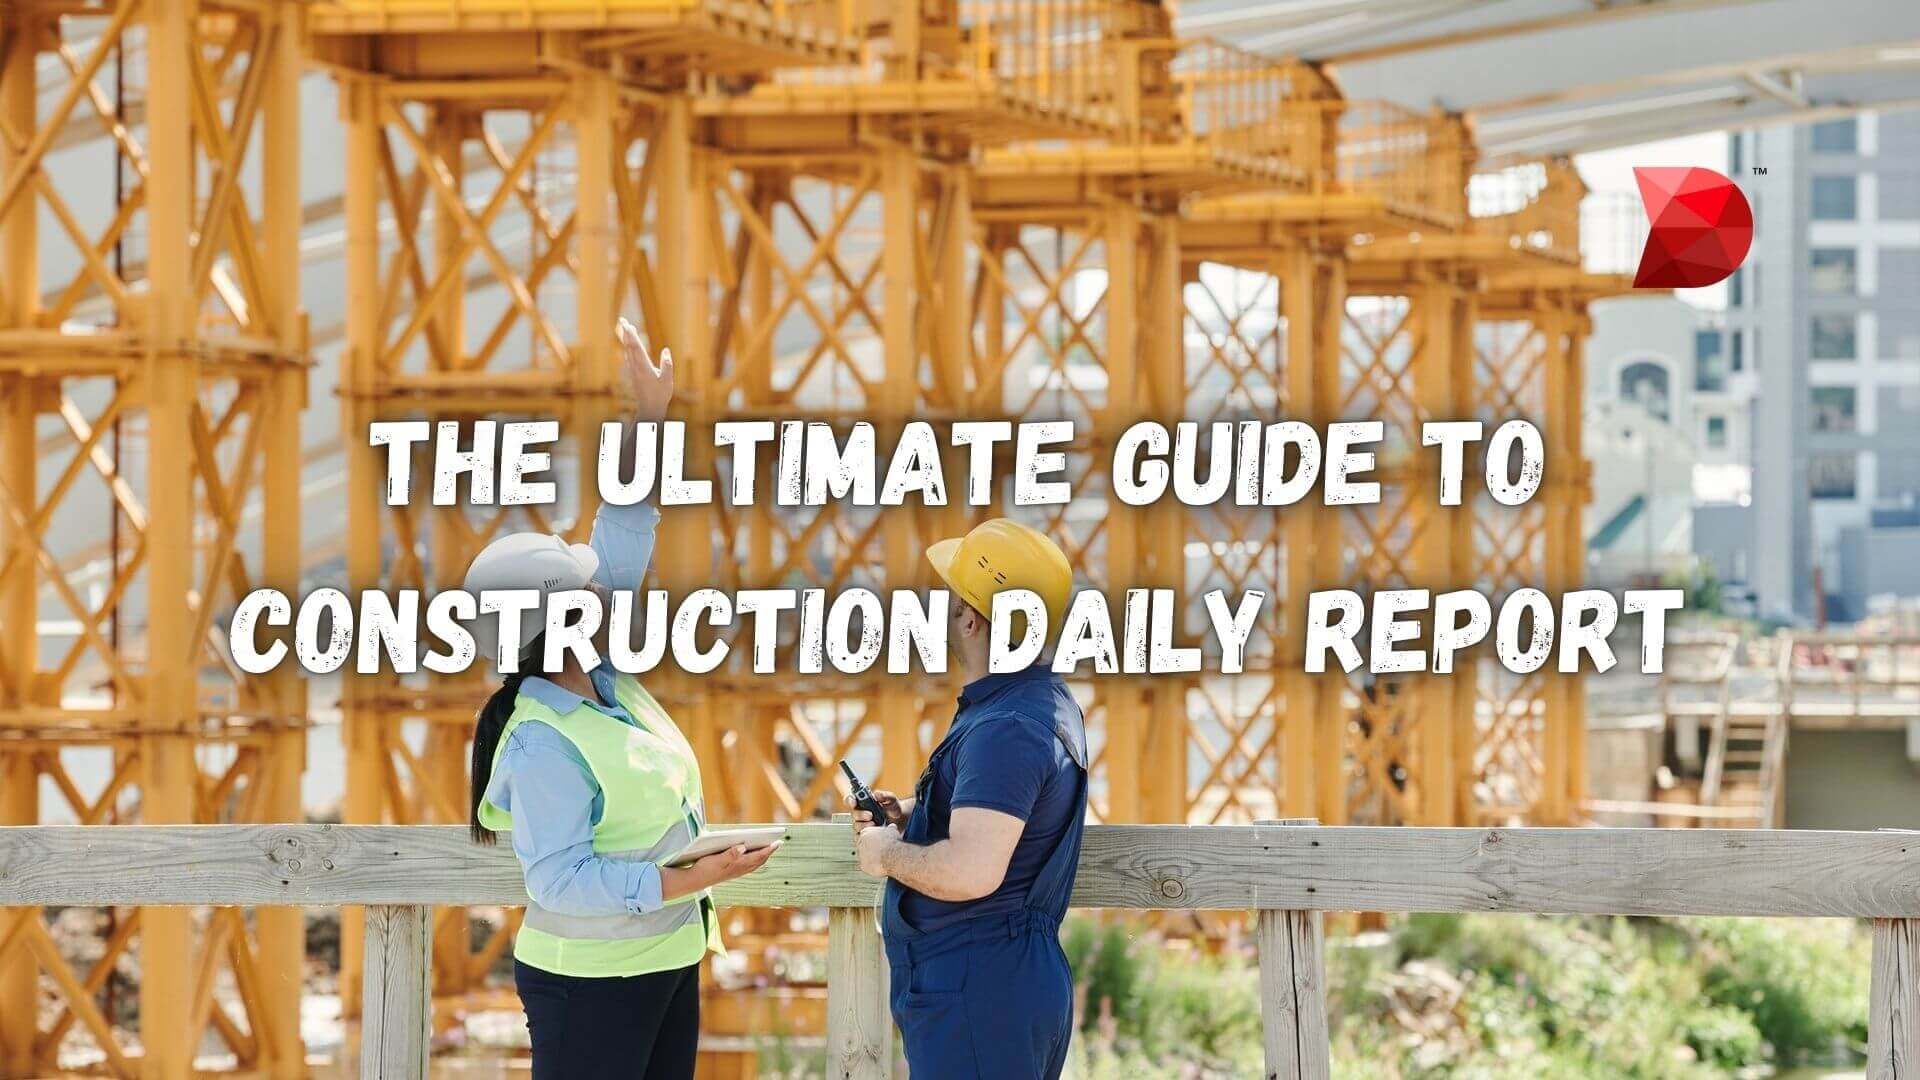 The Ultimate Guide to Construction Daily Report